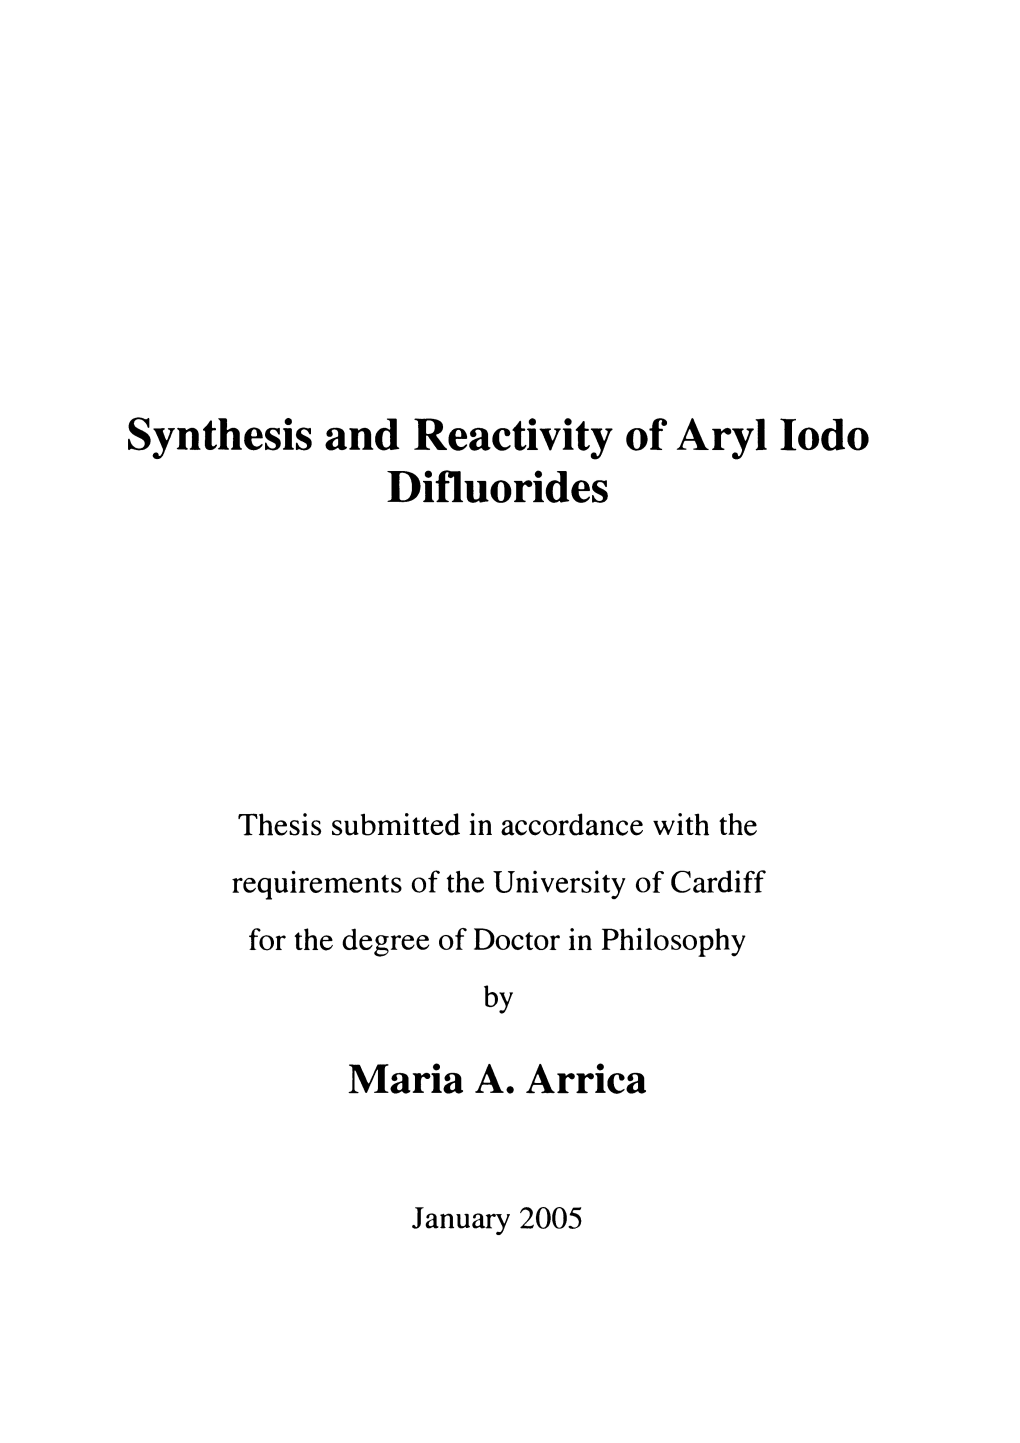 Synthesis and Reactivity of Aryl Iodo Difluorides Maria A. Arrica